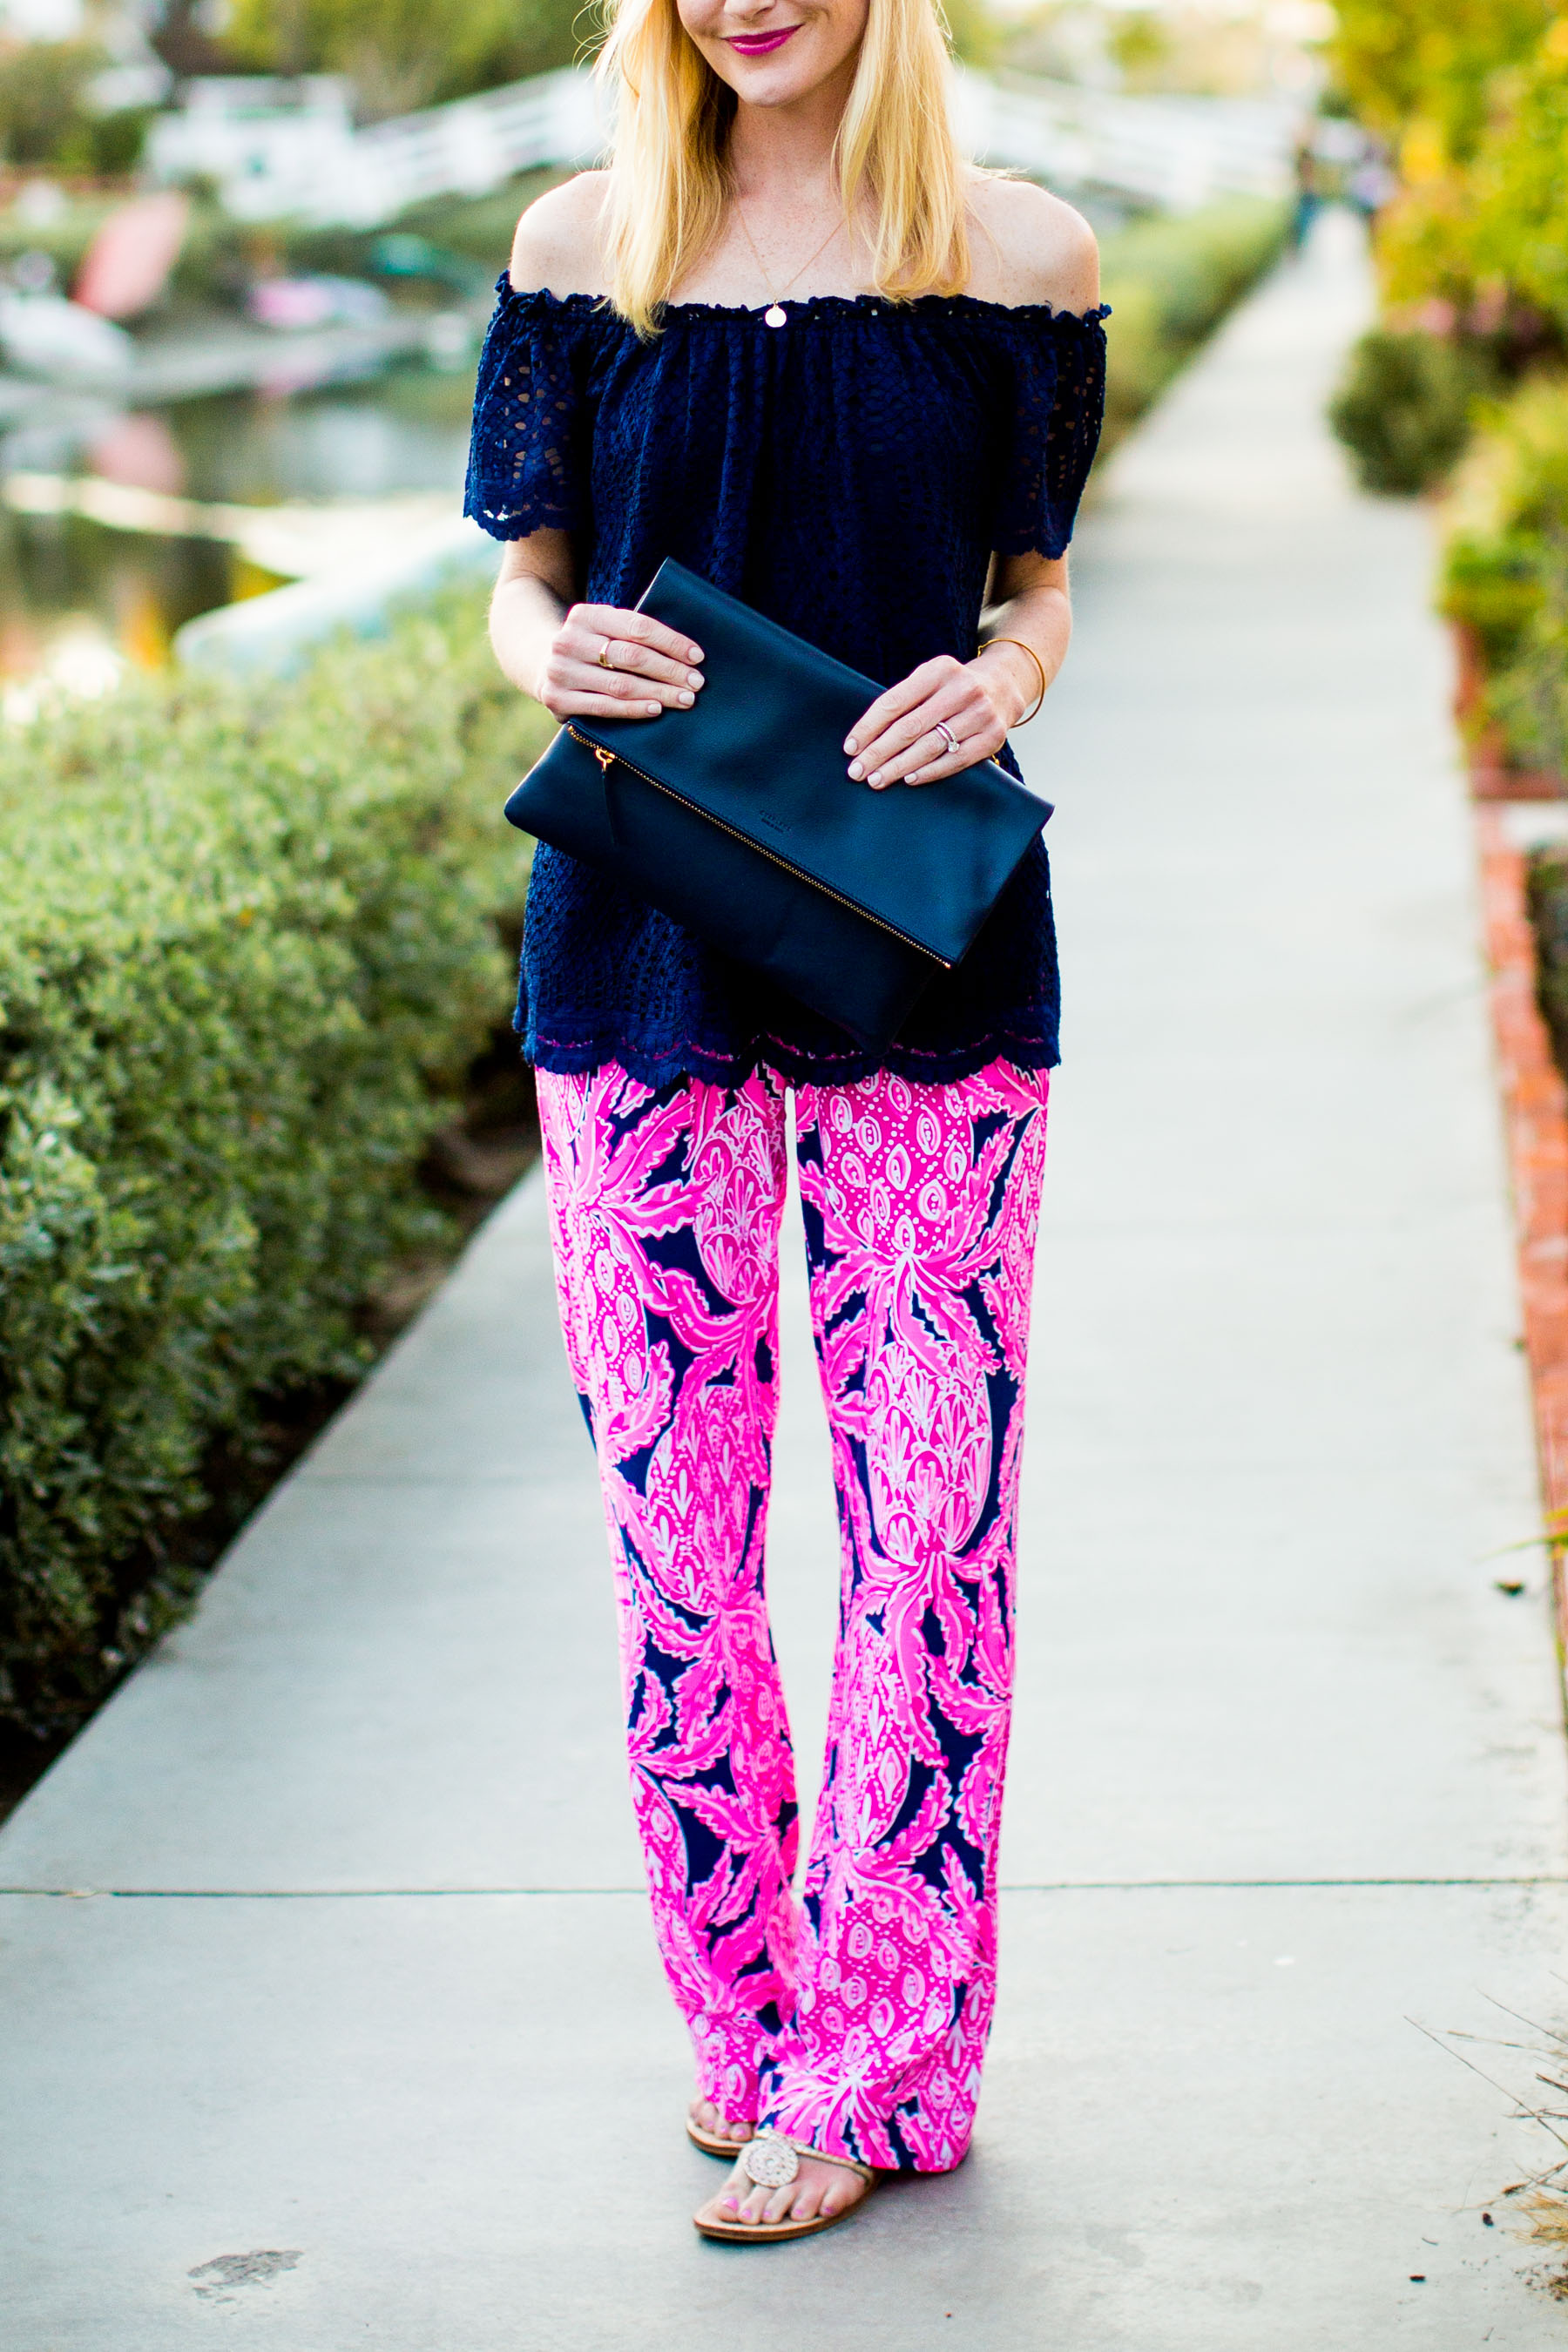 Lilly Pulitzer Pants and Off-the-Shoulder Top / Jack Rogers Flip Flop / Everlane Clutch 